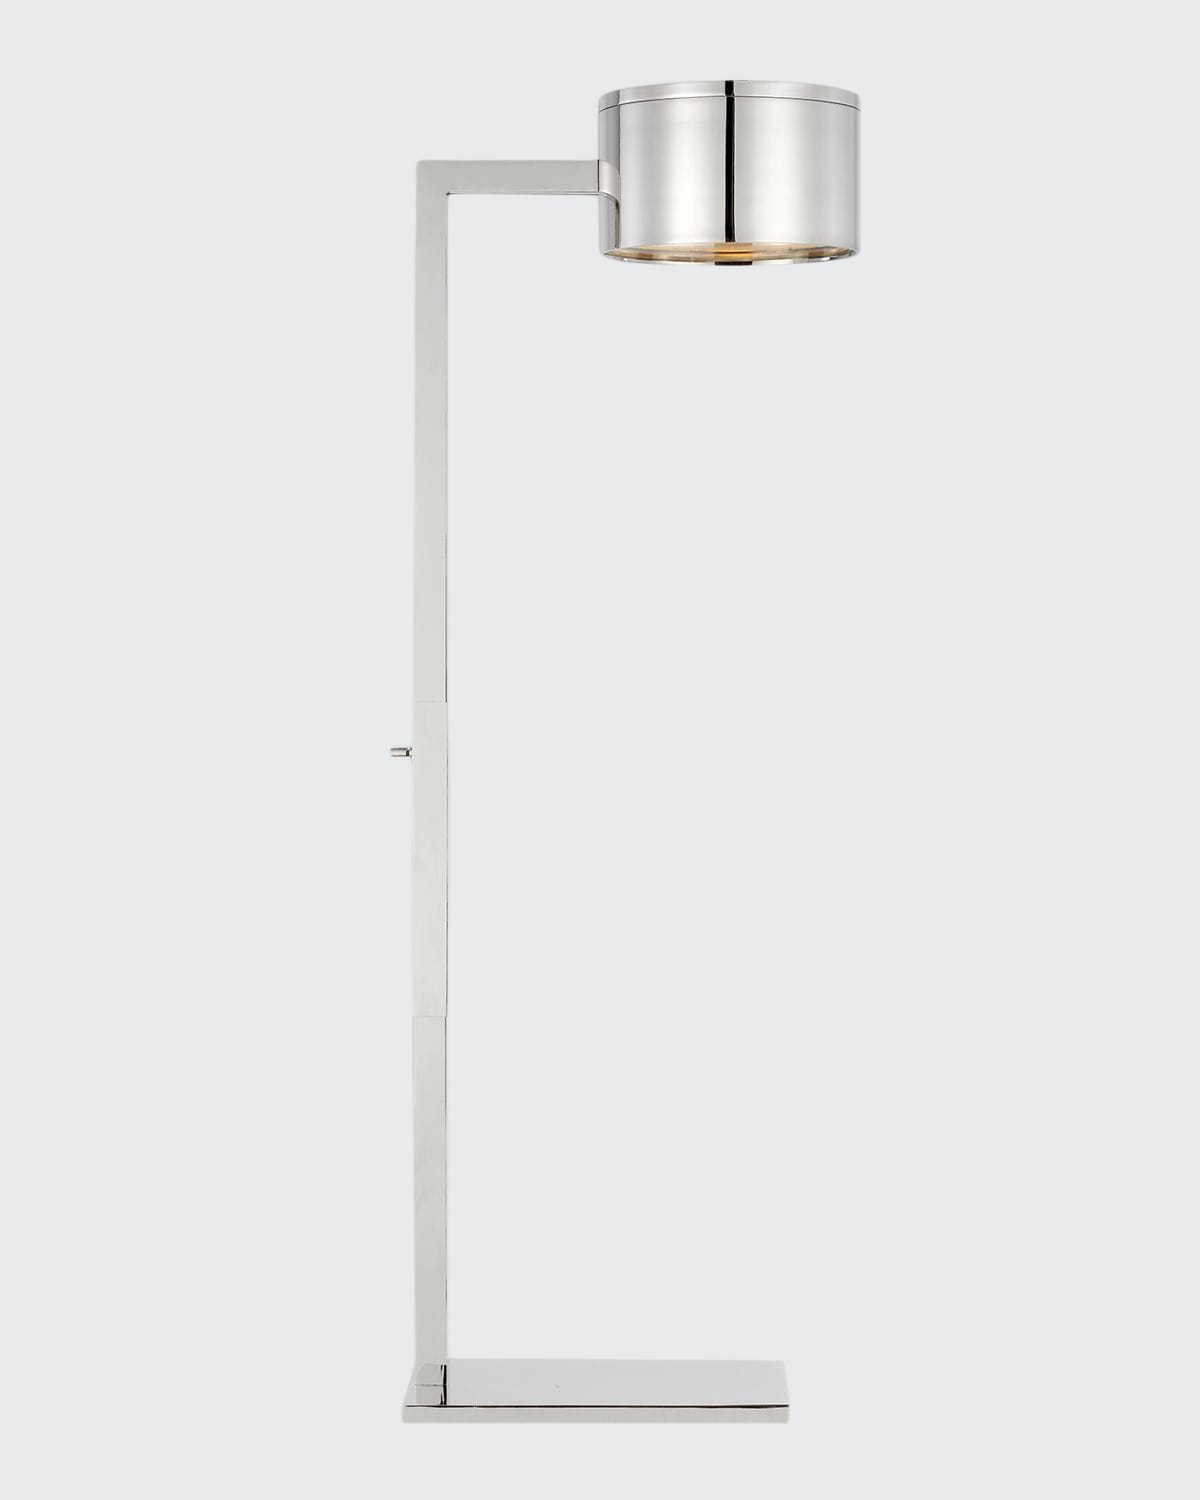 Kelly Wearstler For Visual Comfort Signature Larchmont Floor Lamp In Polished Nickel